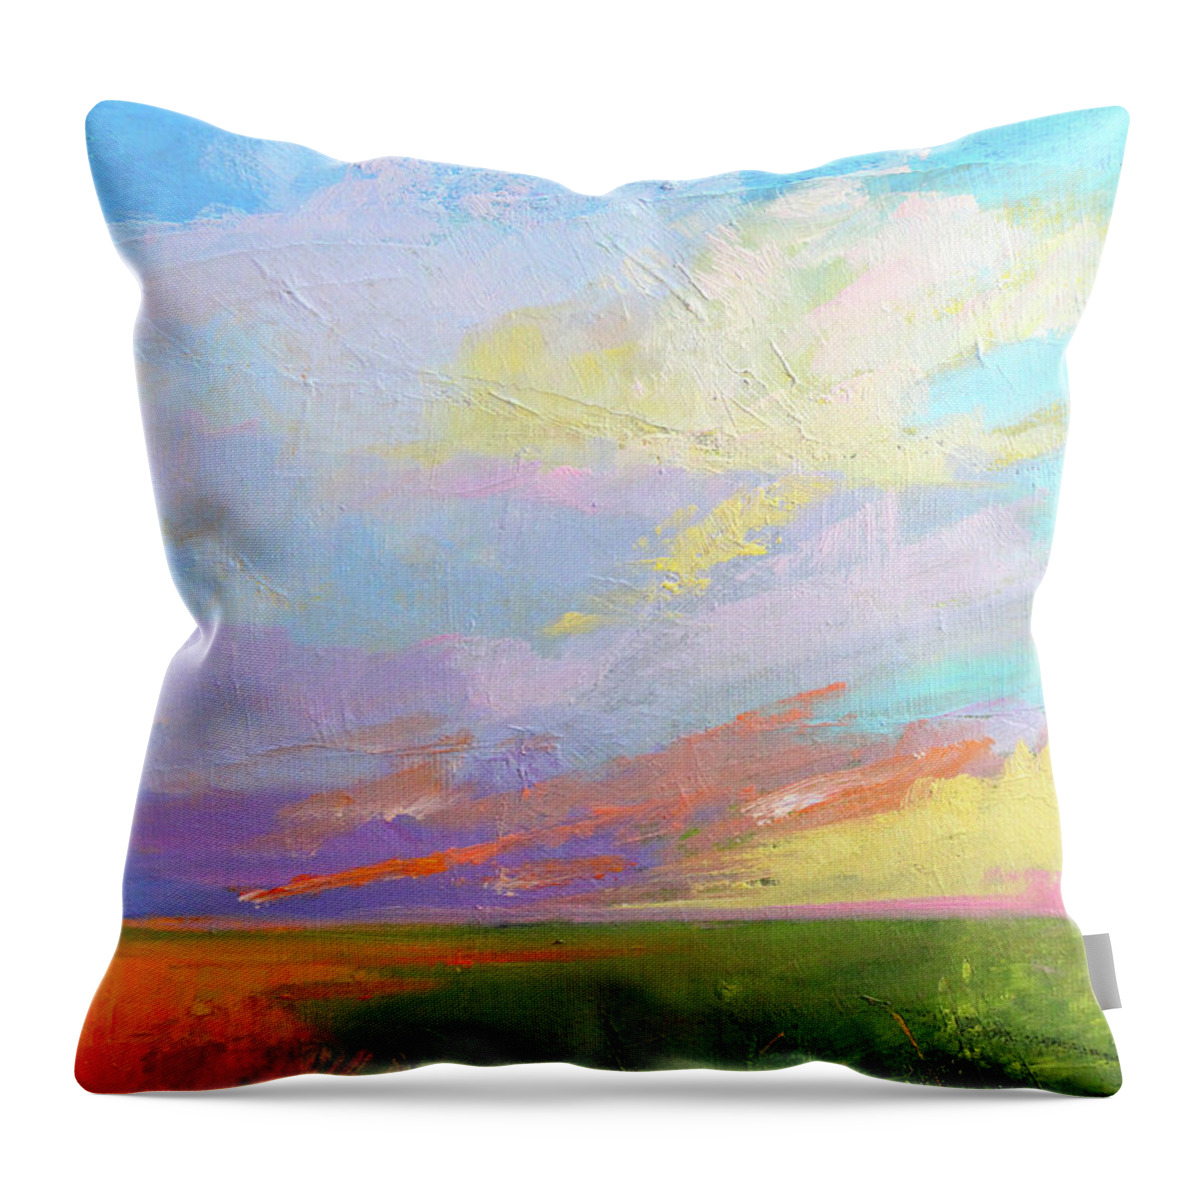 Colorful Sky Painting Throw Pillow featuring the painting Colorful Sky by Nancy Merkle